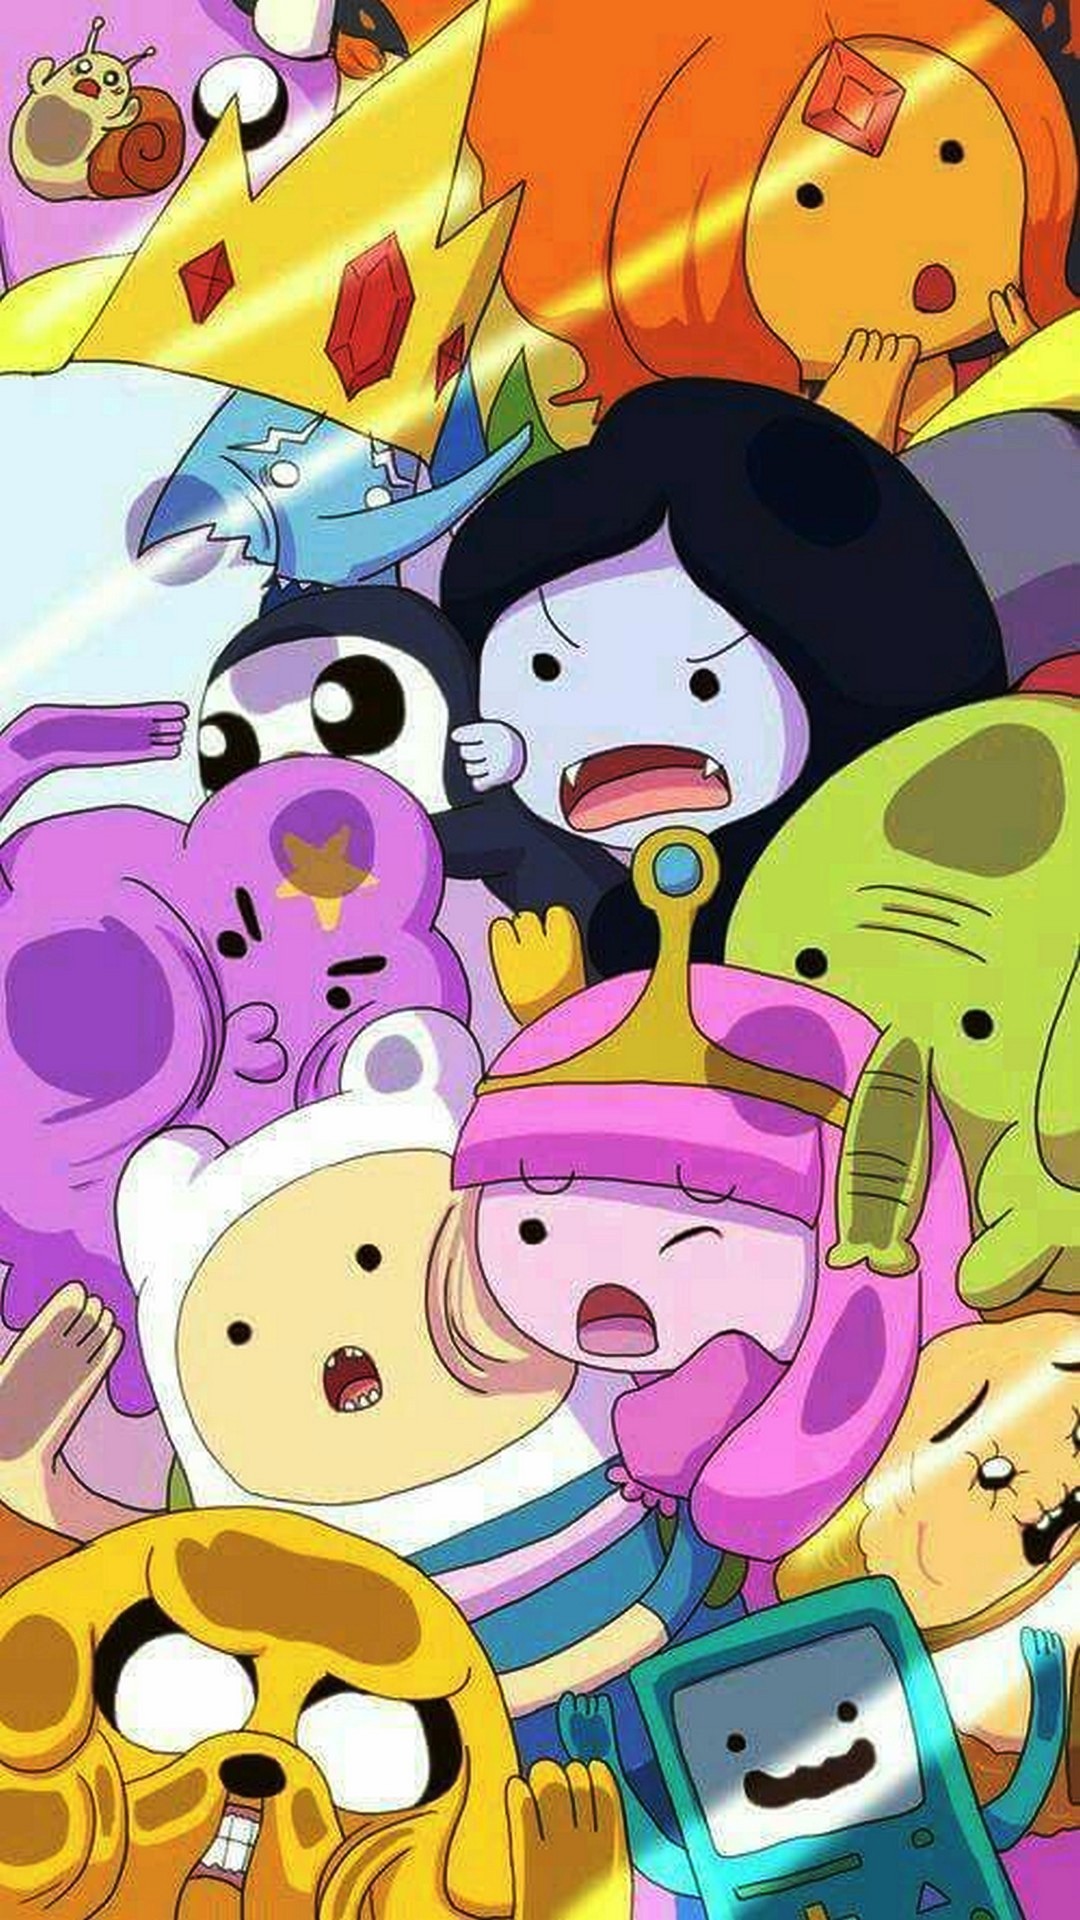 Adventure Time Wallpaper For iPhone with high-resolution 1080x1920 pixel. You can use this wallpaper for your iPhone 5, 6, 7, 8, X backgrounds, Mobile Screensaver, or iPad Lock Screen